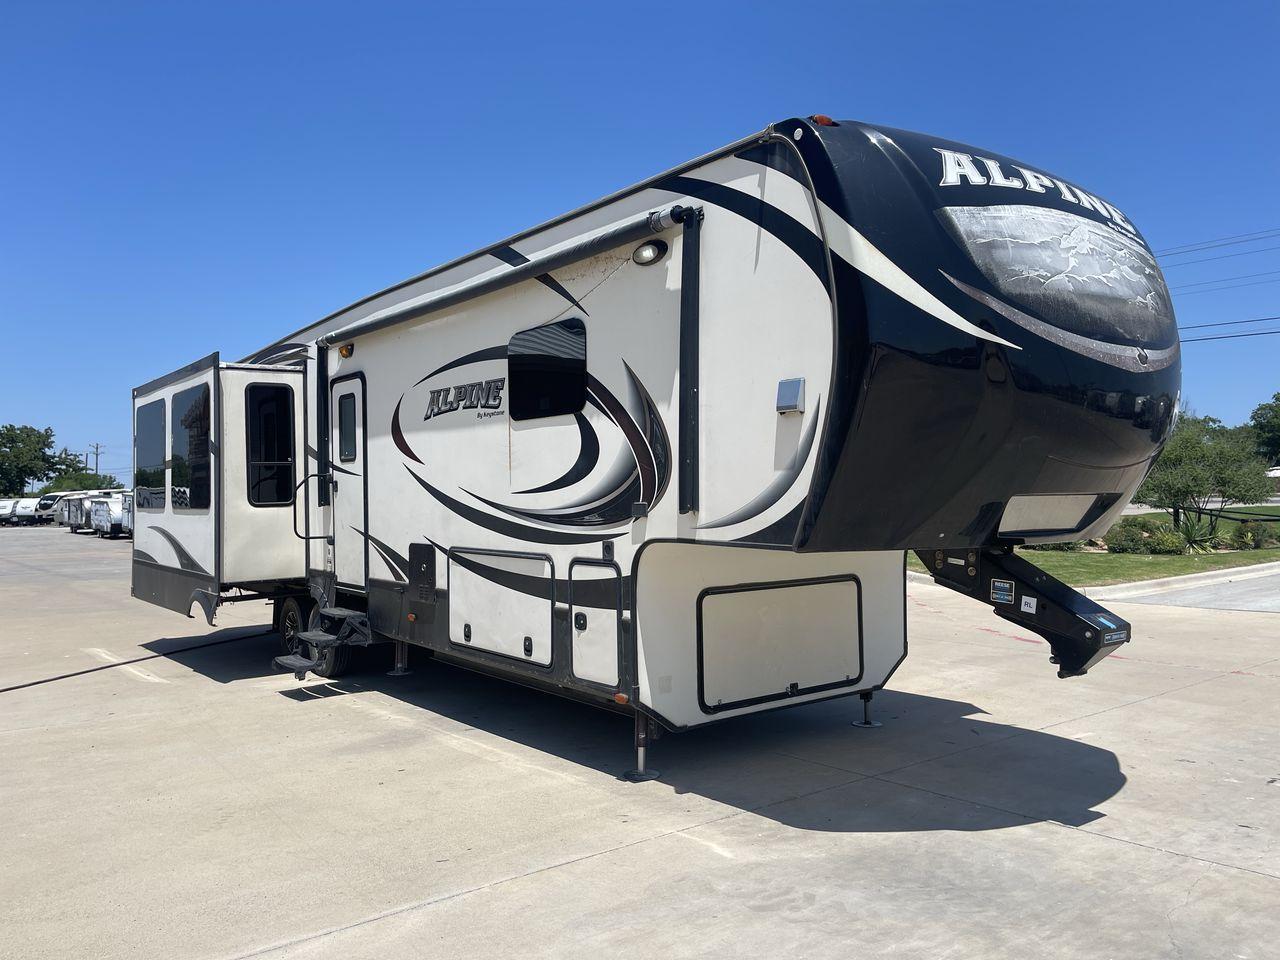 2015 WHITE KEYSTONE ALPINE 3535RE (4YDF35320FE) , Length: 39.08 ft. | Dry Weight: 12,416 lbs. | Gross Weight: 15,500 lbs. | Slides: 4 transmission, located at 4319 N Main Street, Cleburne, TX, 76033, (817) 221-0660, 32.435829, -97.384178 - Improve your RV experience with the 2015 Keystone Alpine 3535RE, a high-end fifth wheel that embodies ease and style. This model, which is an impressive 39.08 feet long, was carefully made for discerning travelers who want a perfect mix of style and usefulness. Because it is made of an aluminum body - Photo #23